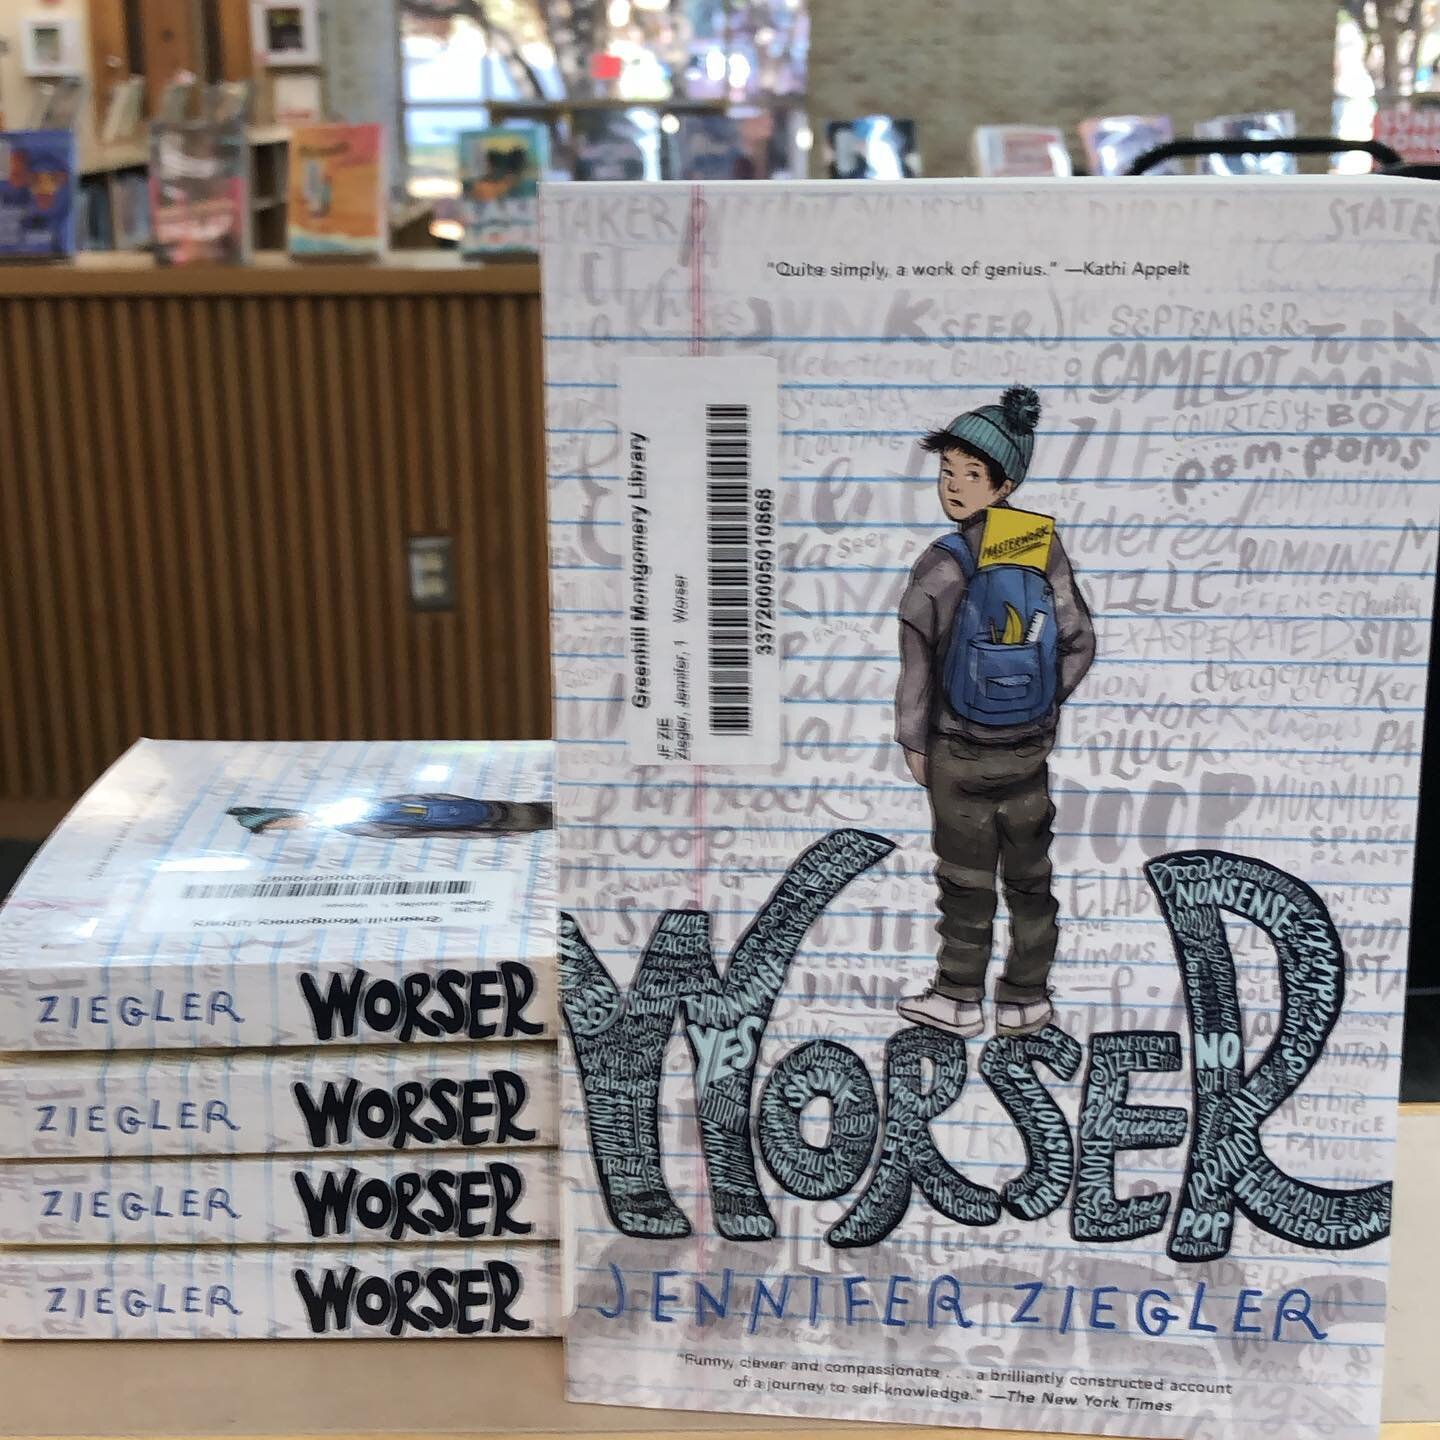 Excited to see Jennifer Ziegler next week and hear her speak with middle school readers and writers! #worser #middlegradebooks #schoolvisits